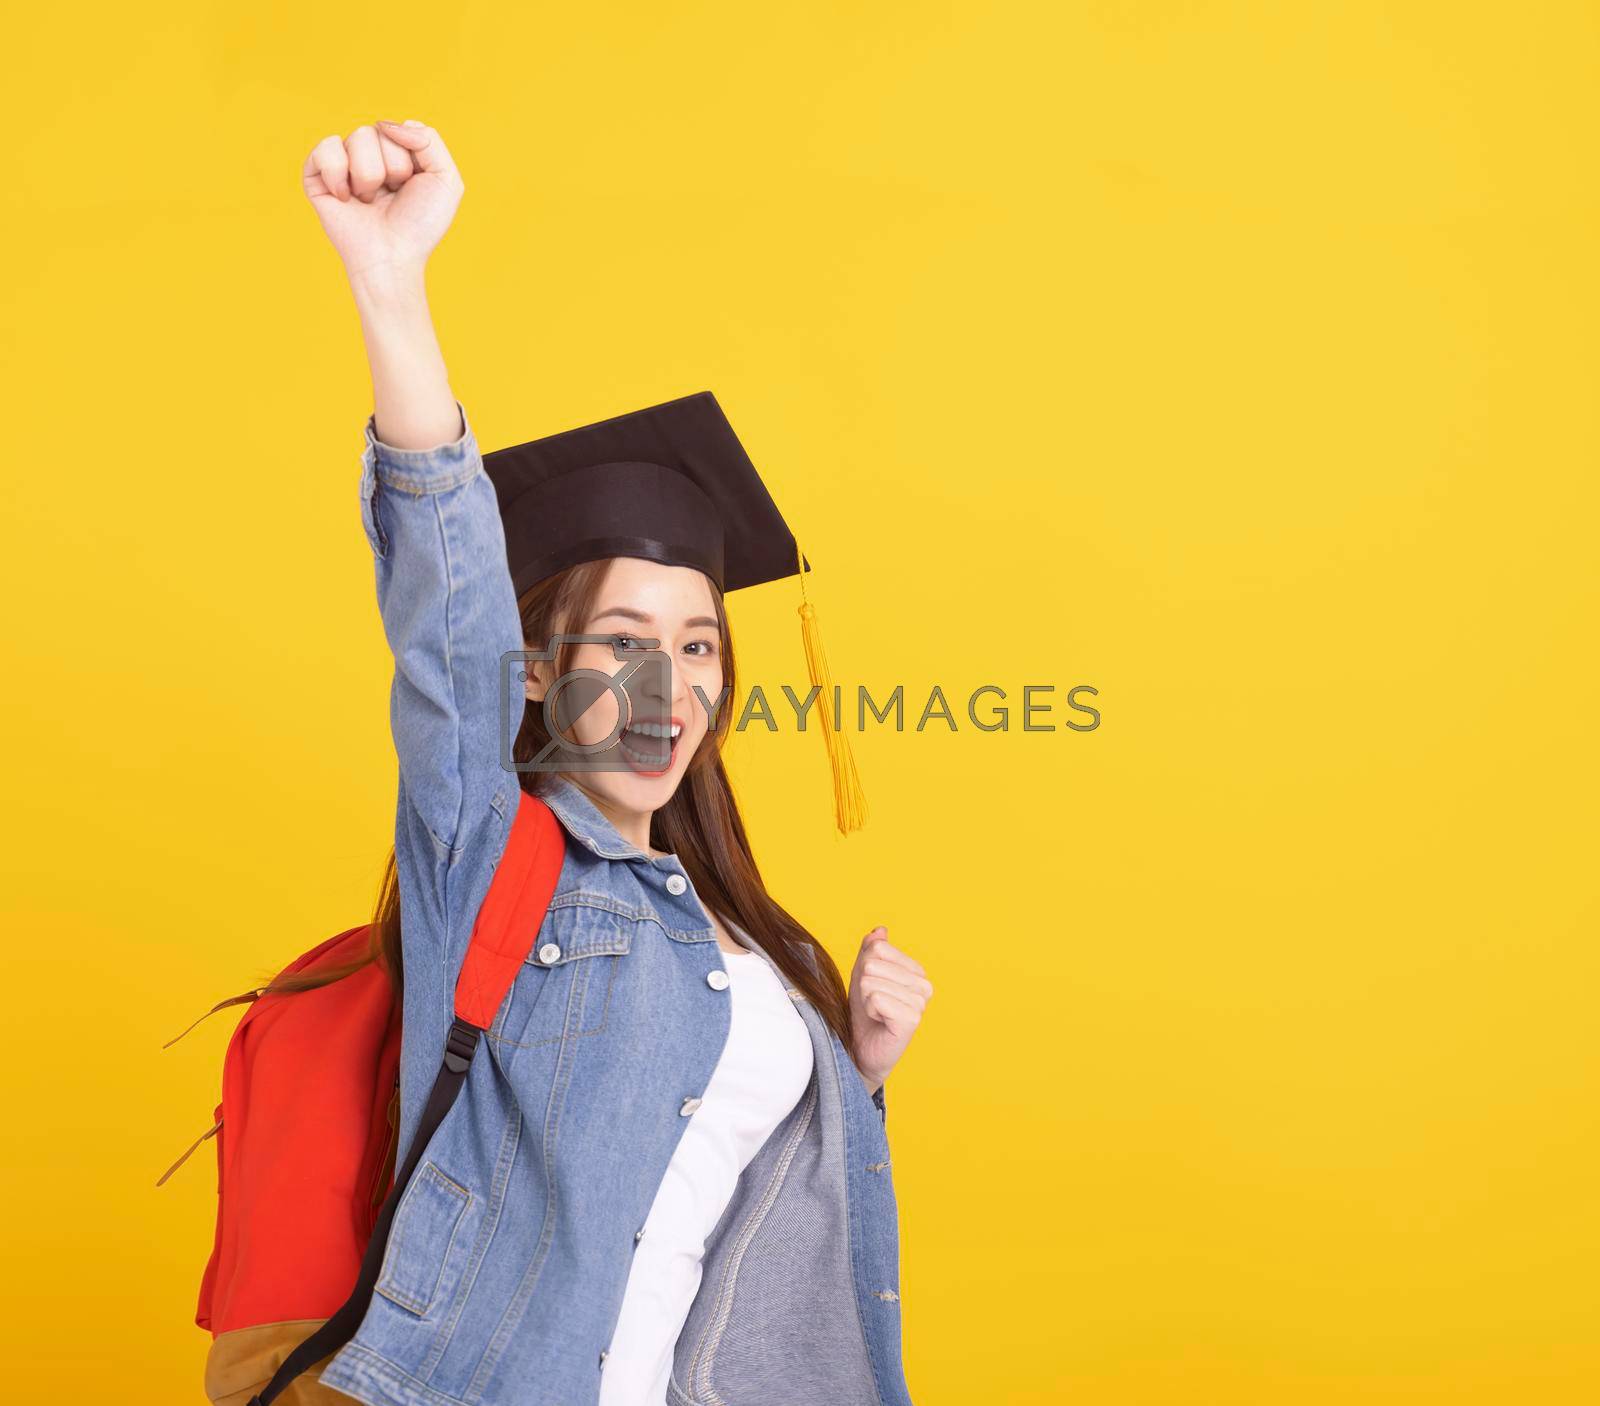 Royalty free image of Happy Asian girl college student in Graduation cap with success gesture by tomwang